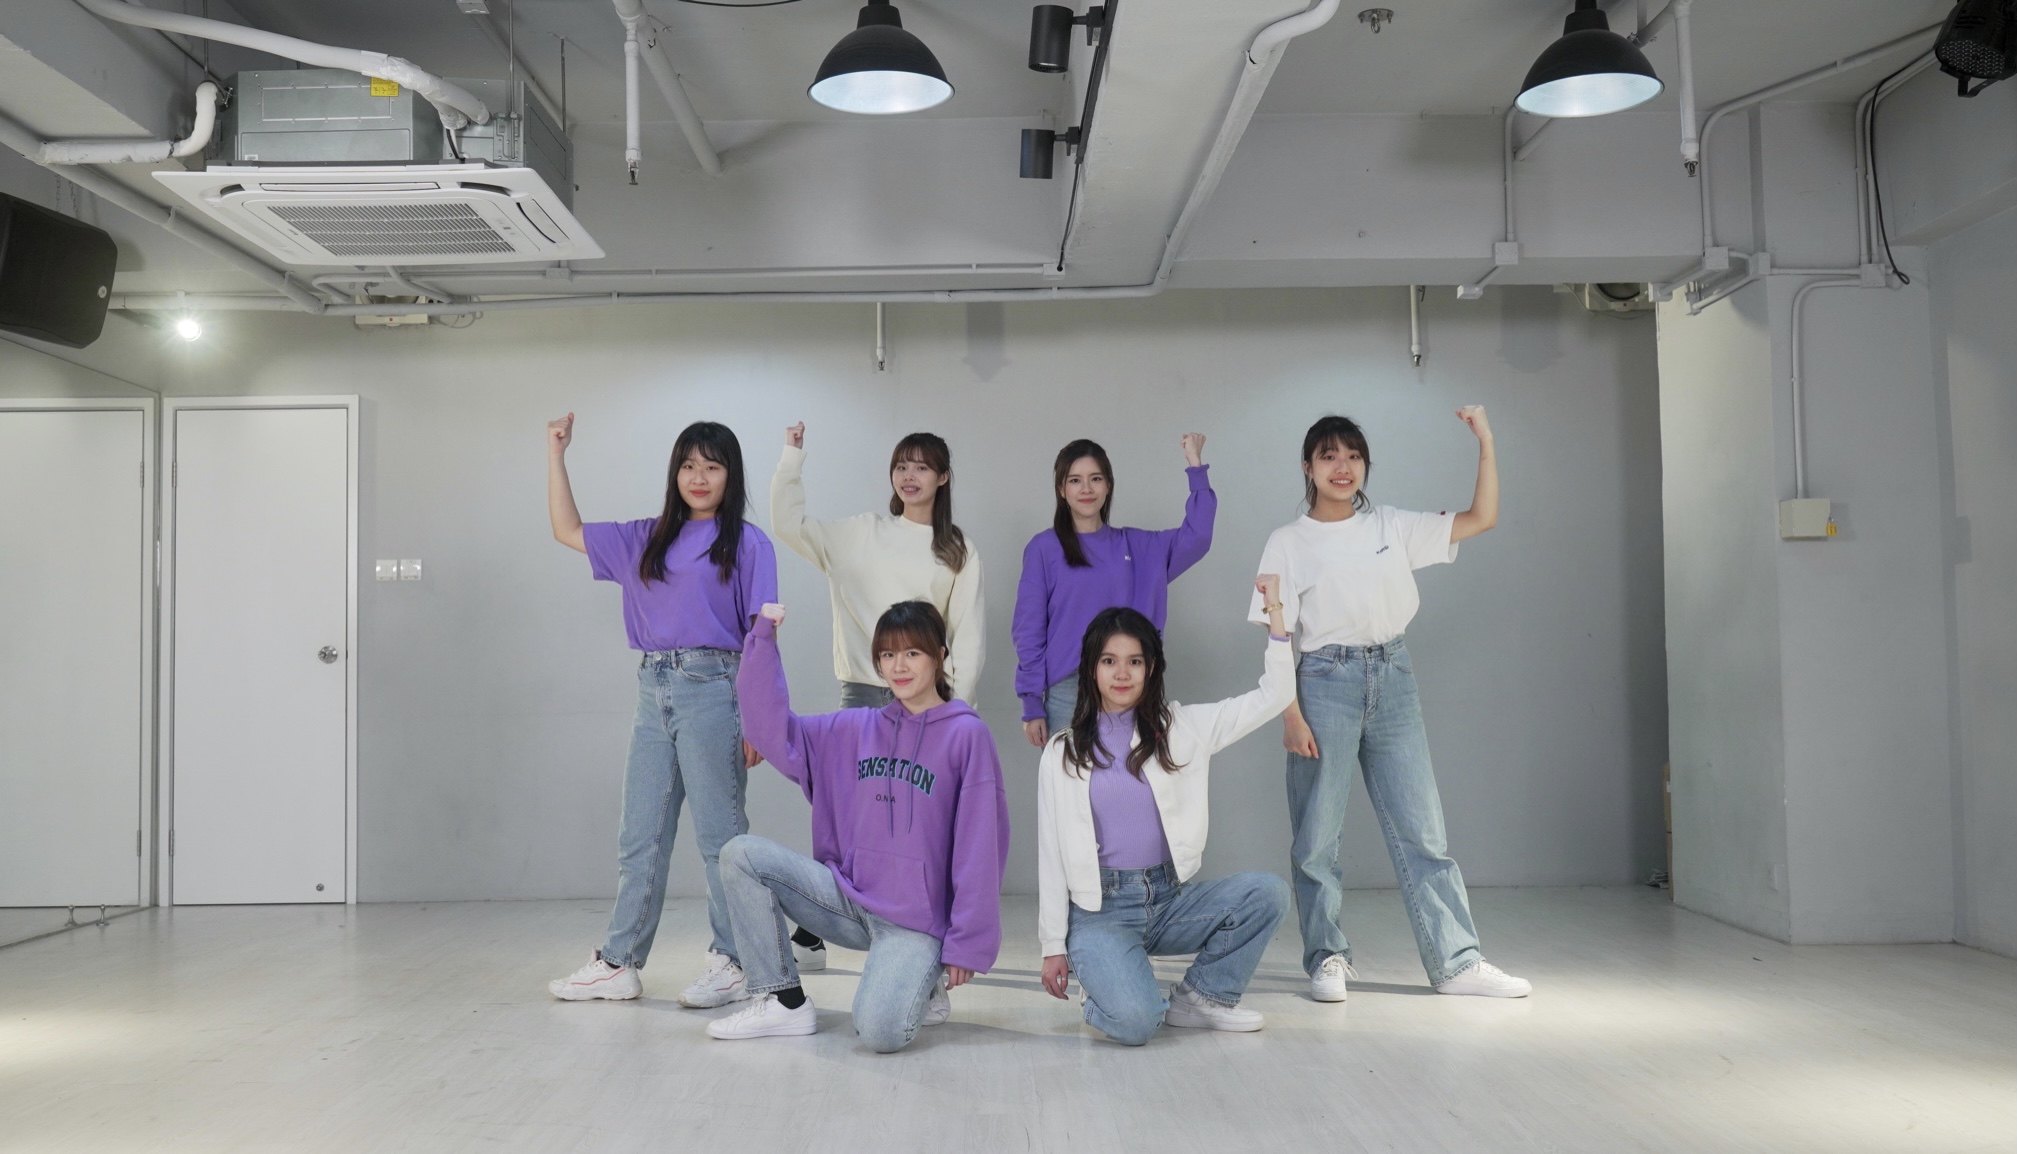 Chocomint HK are a Hong Kong-based cover dance crew who are taking part in “K-pop in public”, a popular trend on social media platforms such as YouTube. Photo: Chocomint HK